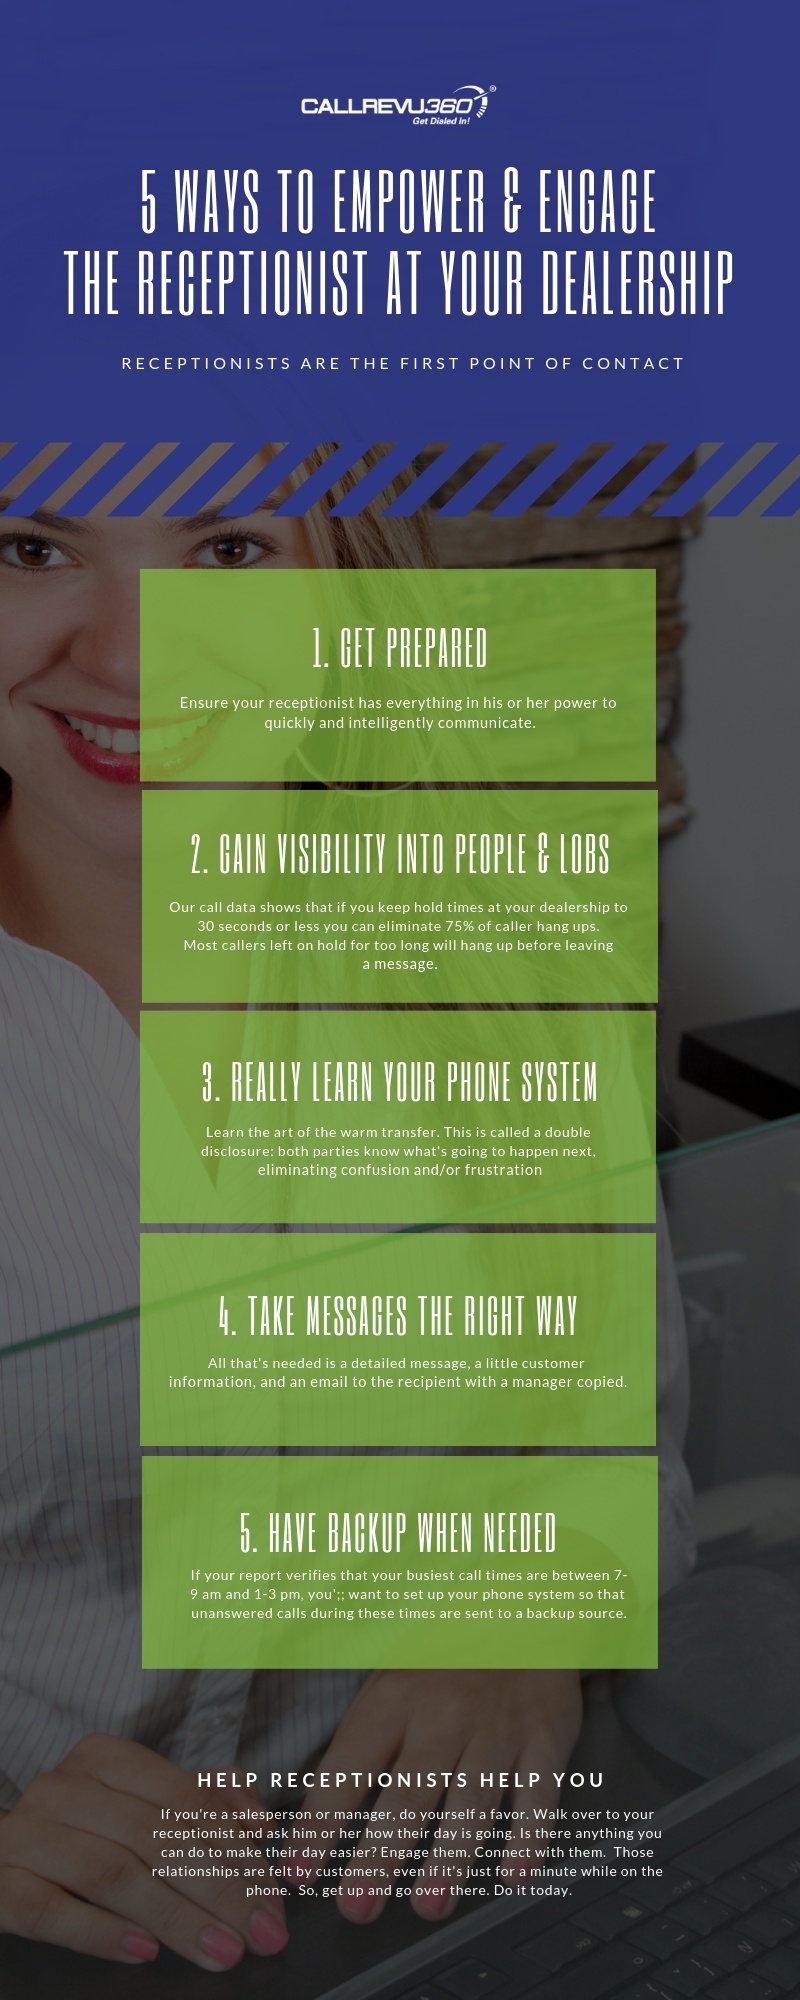 Infographic - 5 Ways to Empower & Engage the Receptionist at your Dealership